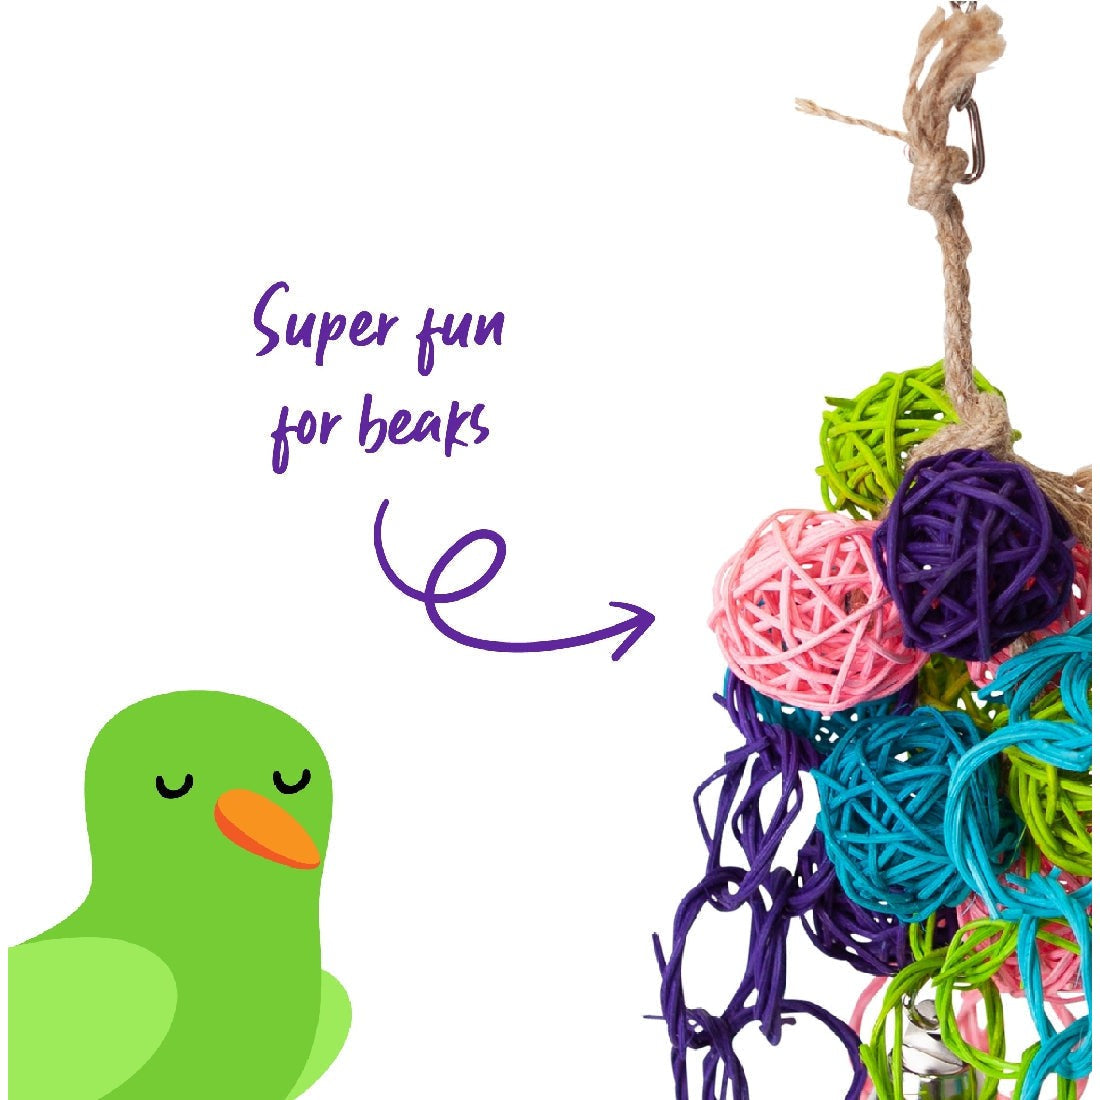 Alt: Cartoon green bird toy with colorful wicker balls and text.